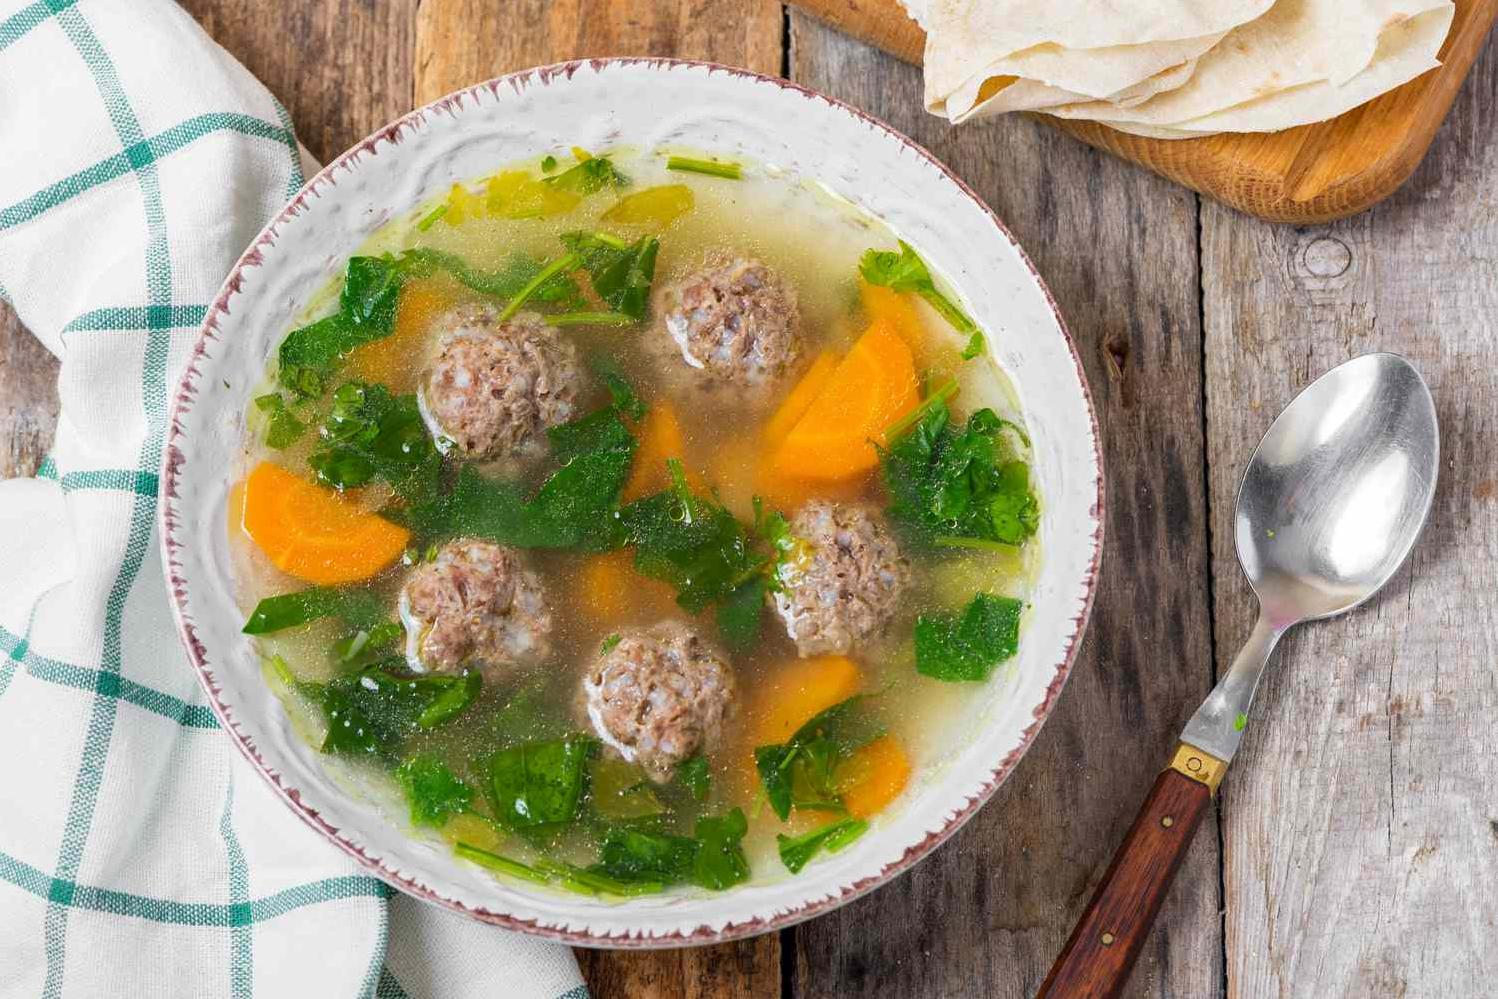  A bowl of comfort on a chilly day - Sopa de Albondigas